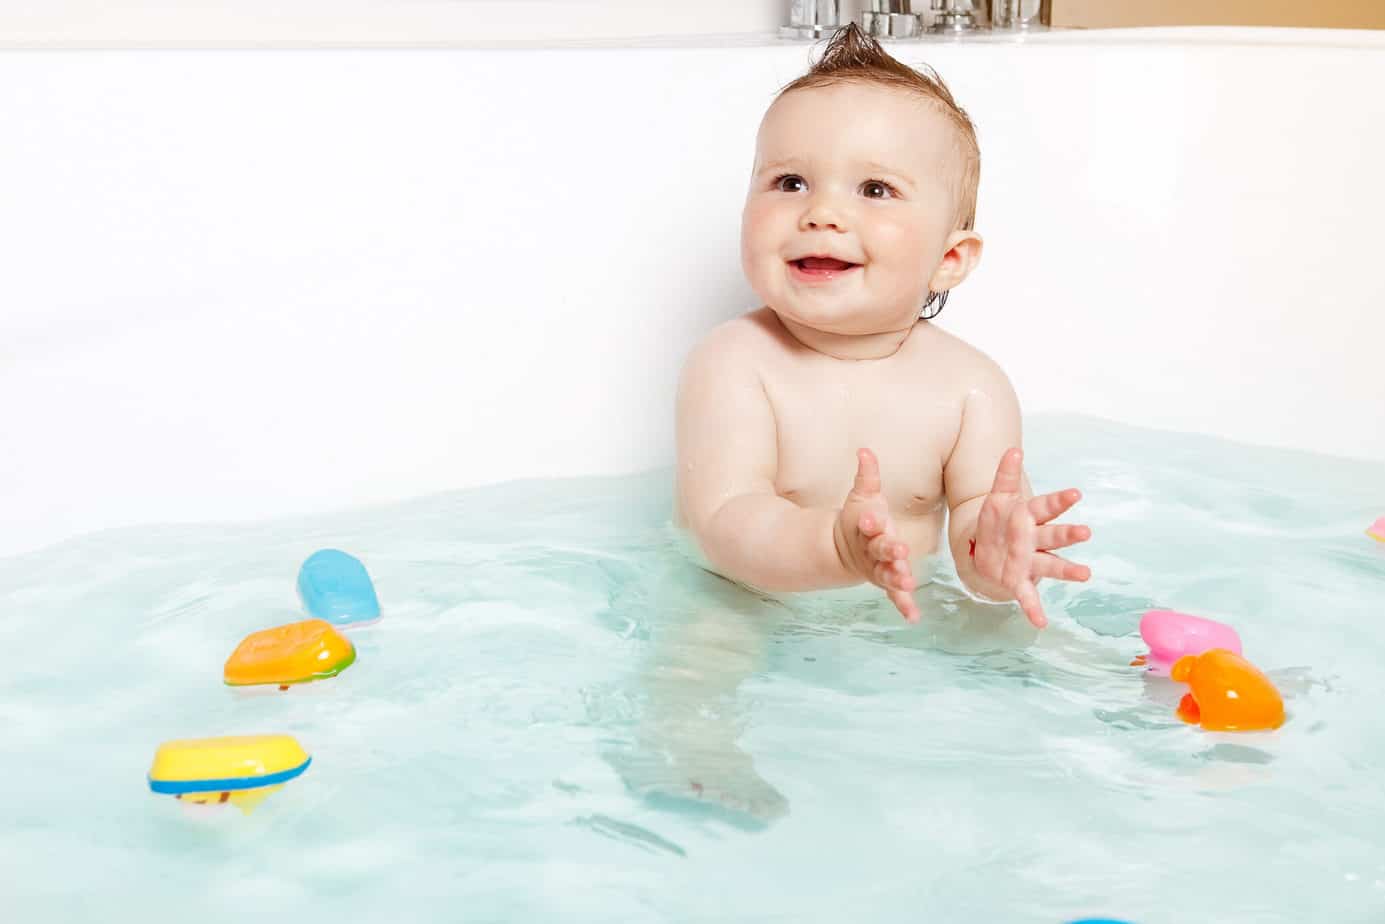 Bath Safety: how to use essential oils safely in the bath